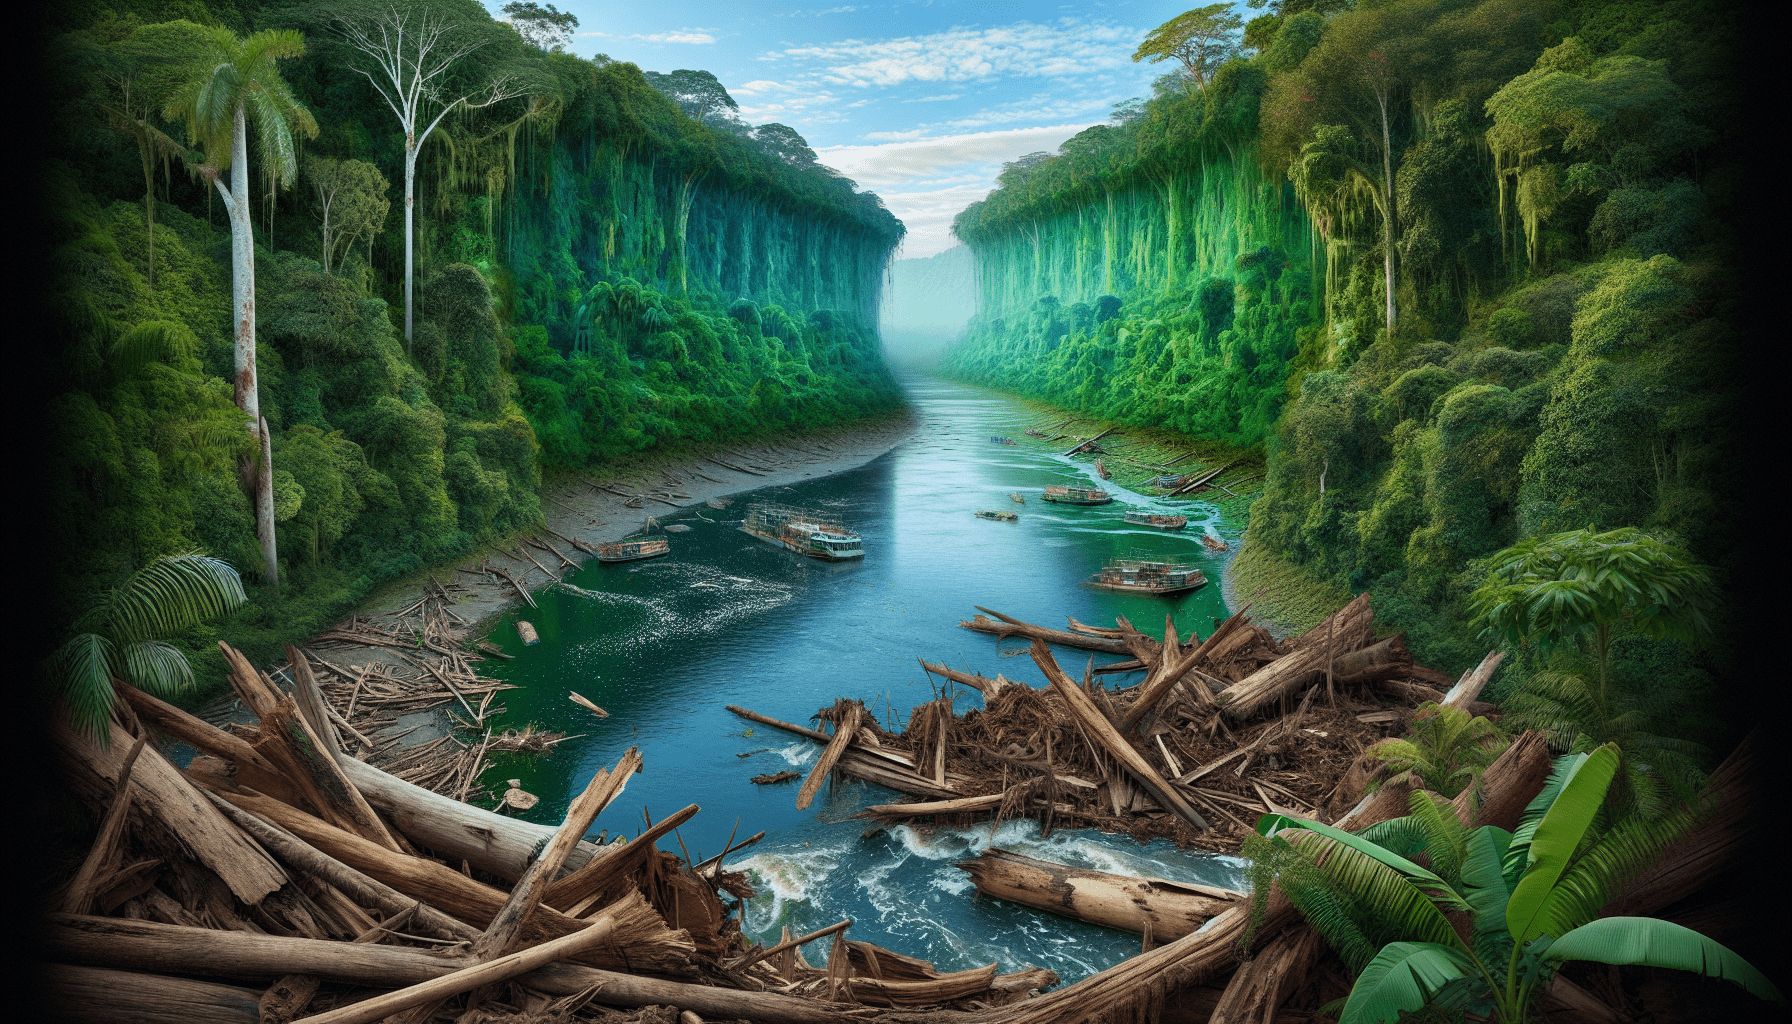 How Is The Amazon River In Danger?